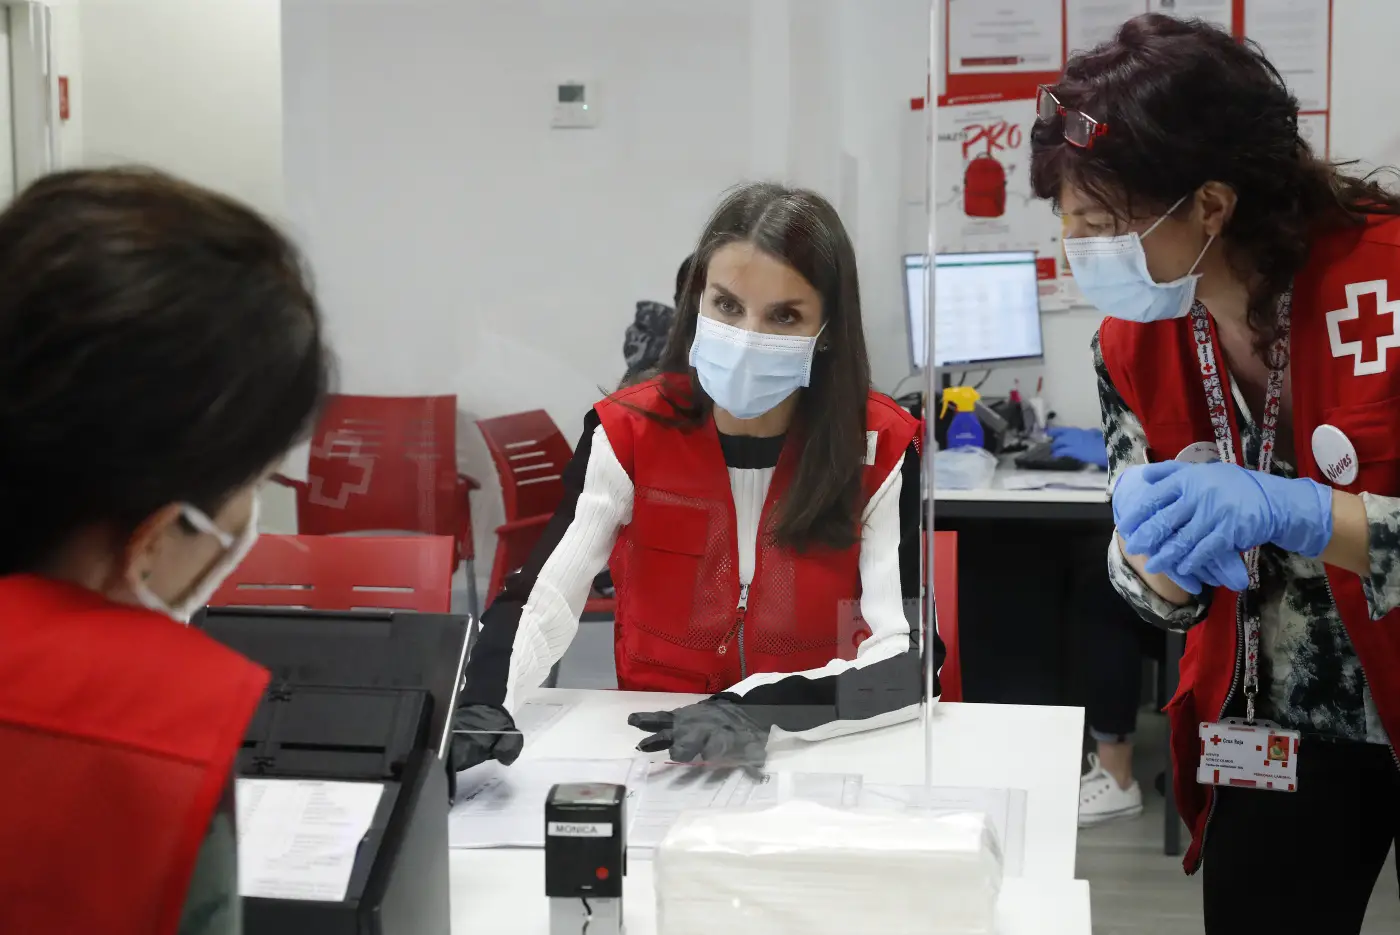 Queen Letizia of Spain visited the Red Cross in Madrid